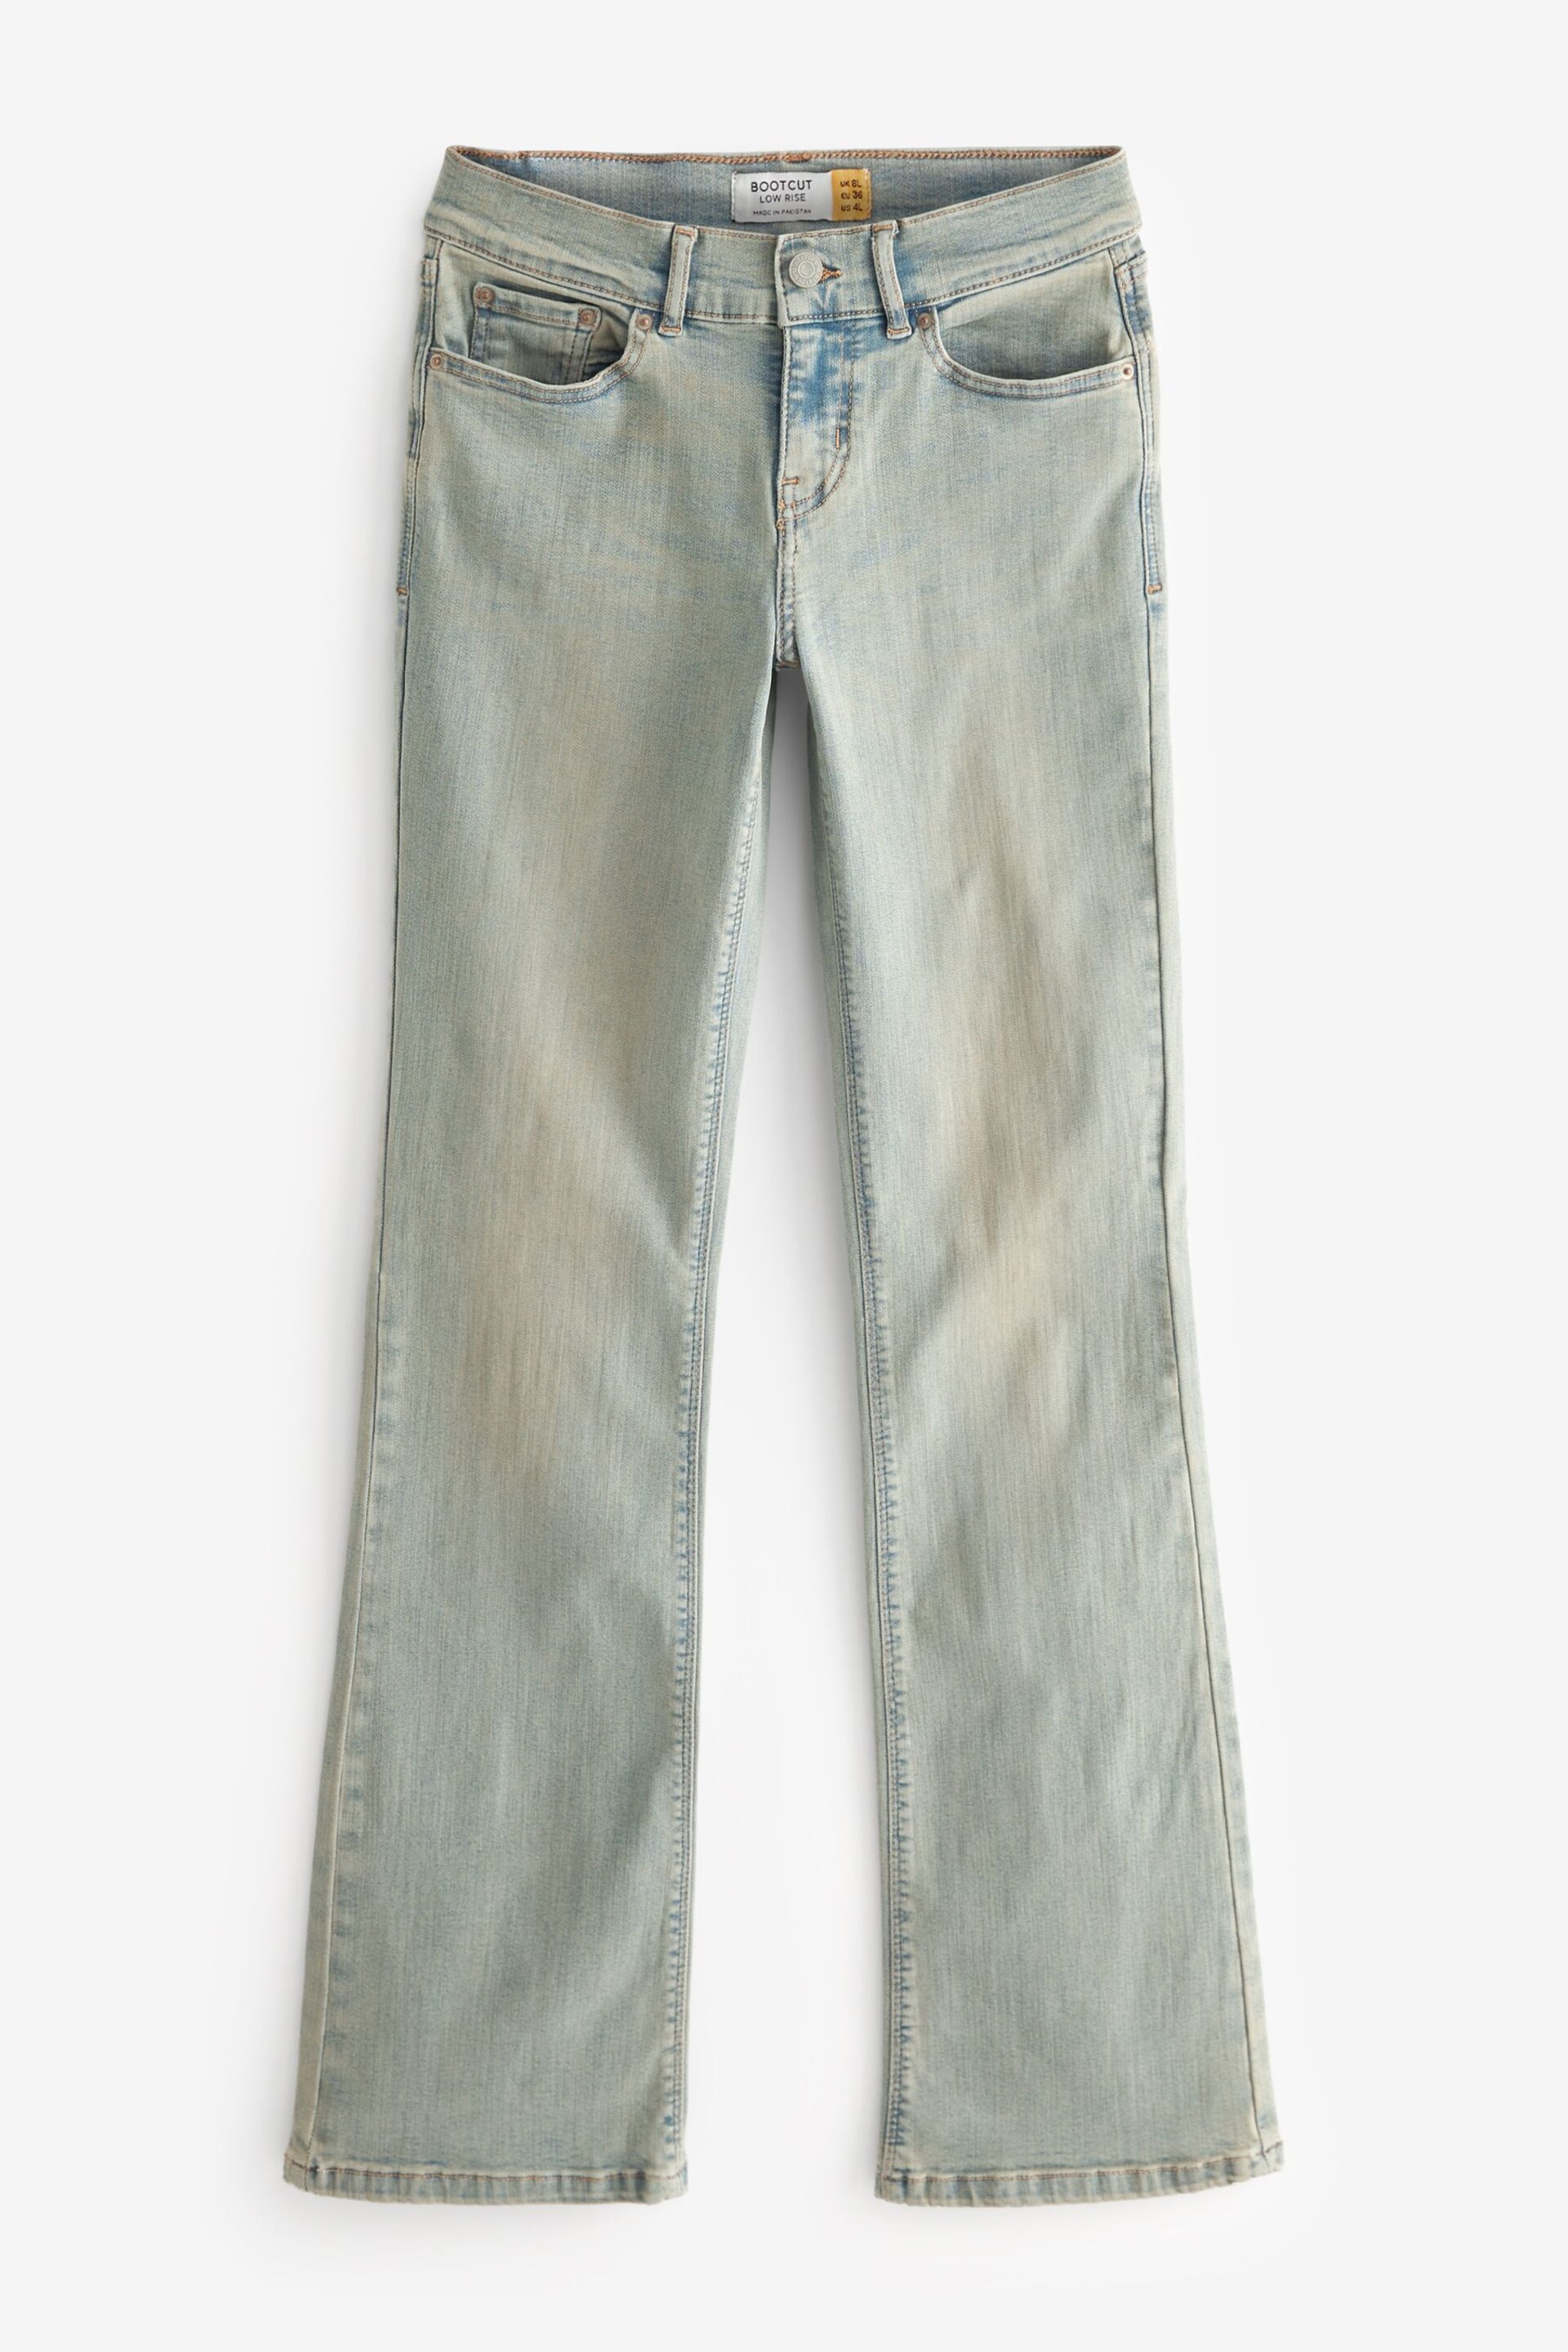 Green Tinted Low Bootcut Jeans - Image 6 of 7